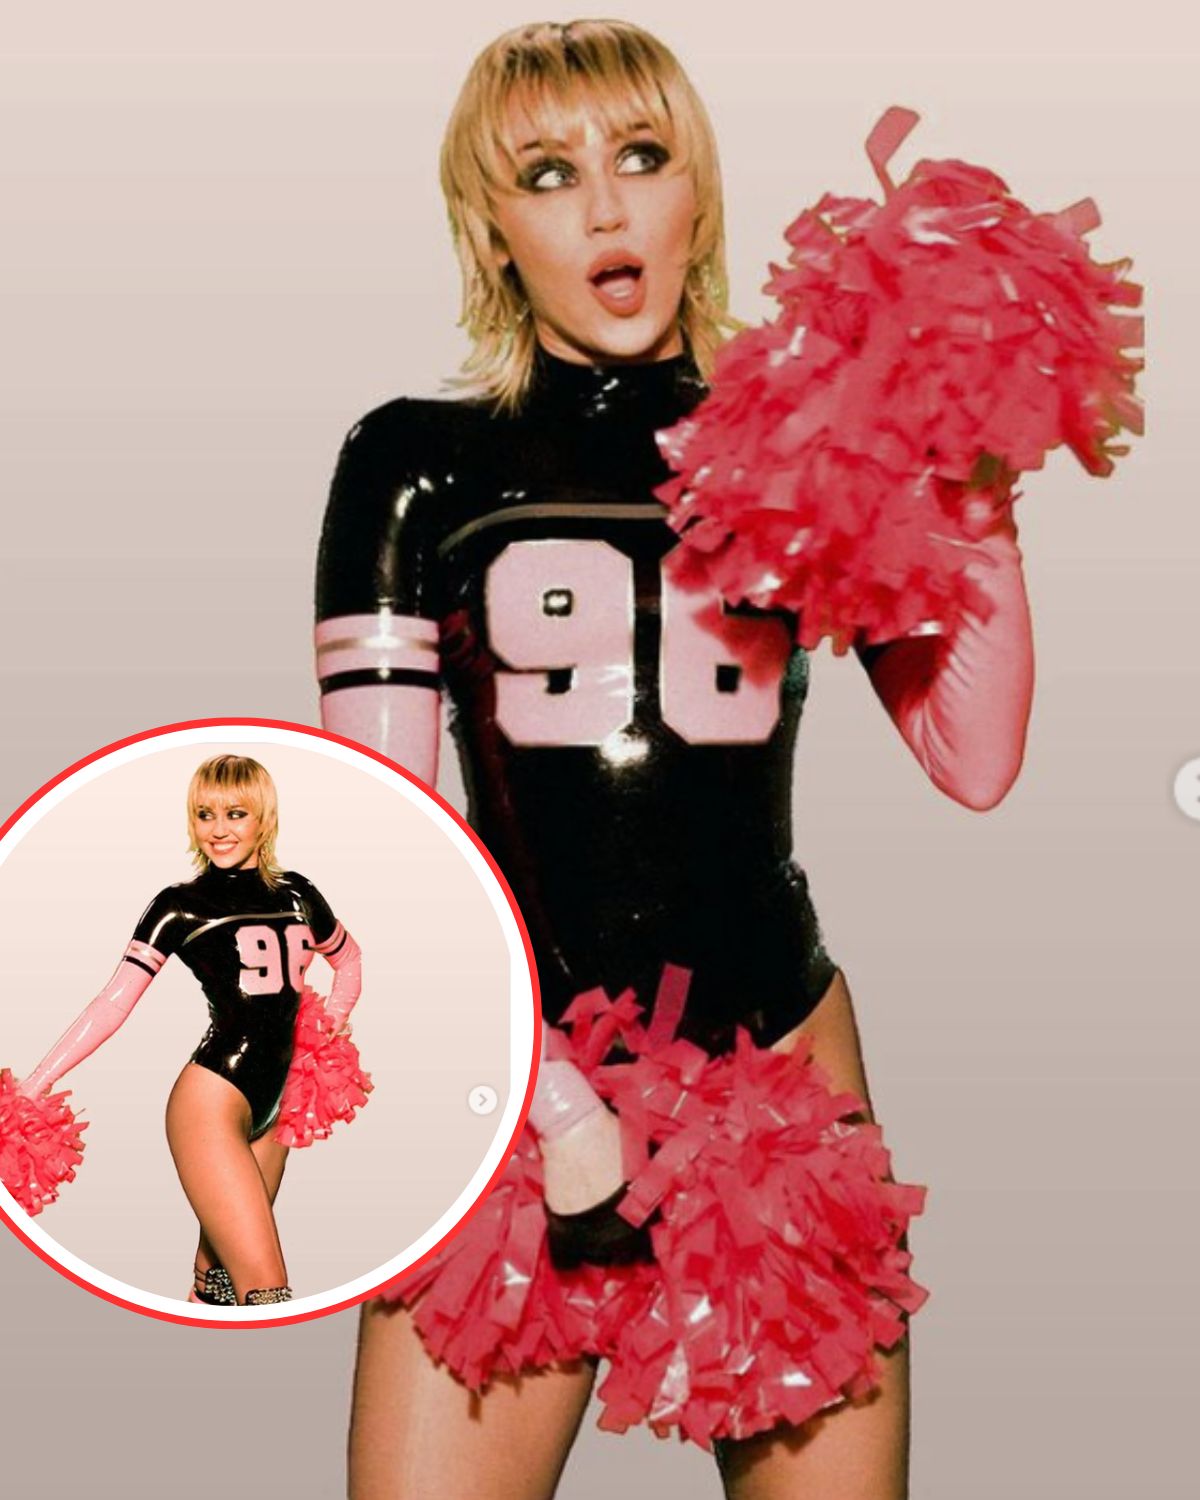 Cover Image for Miley Cyrus slips into skintight latex cheerleader’s uniform as she announces her TikTok Tailgate performance ahead of the Super Bowl